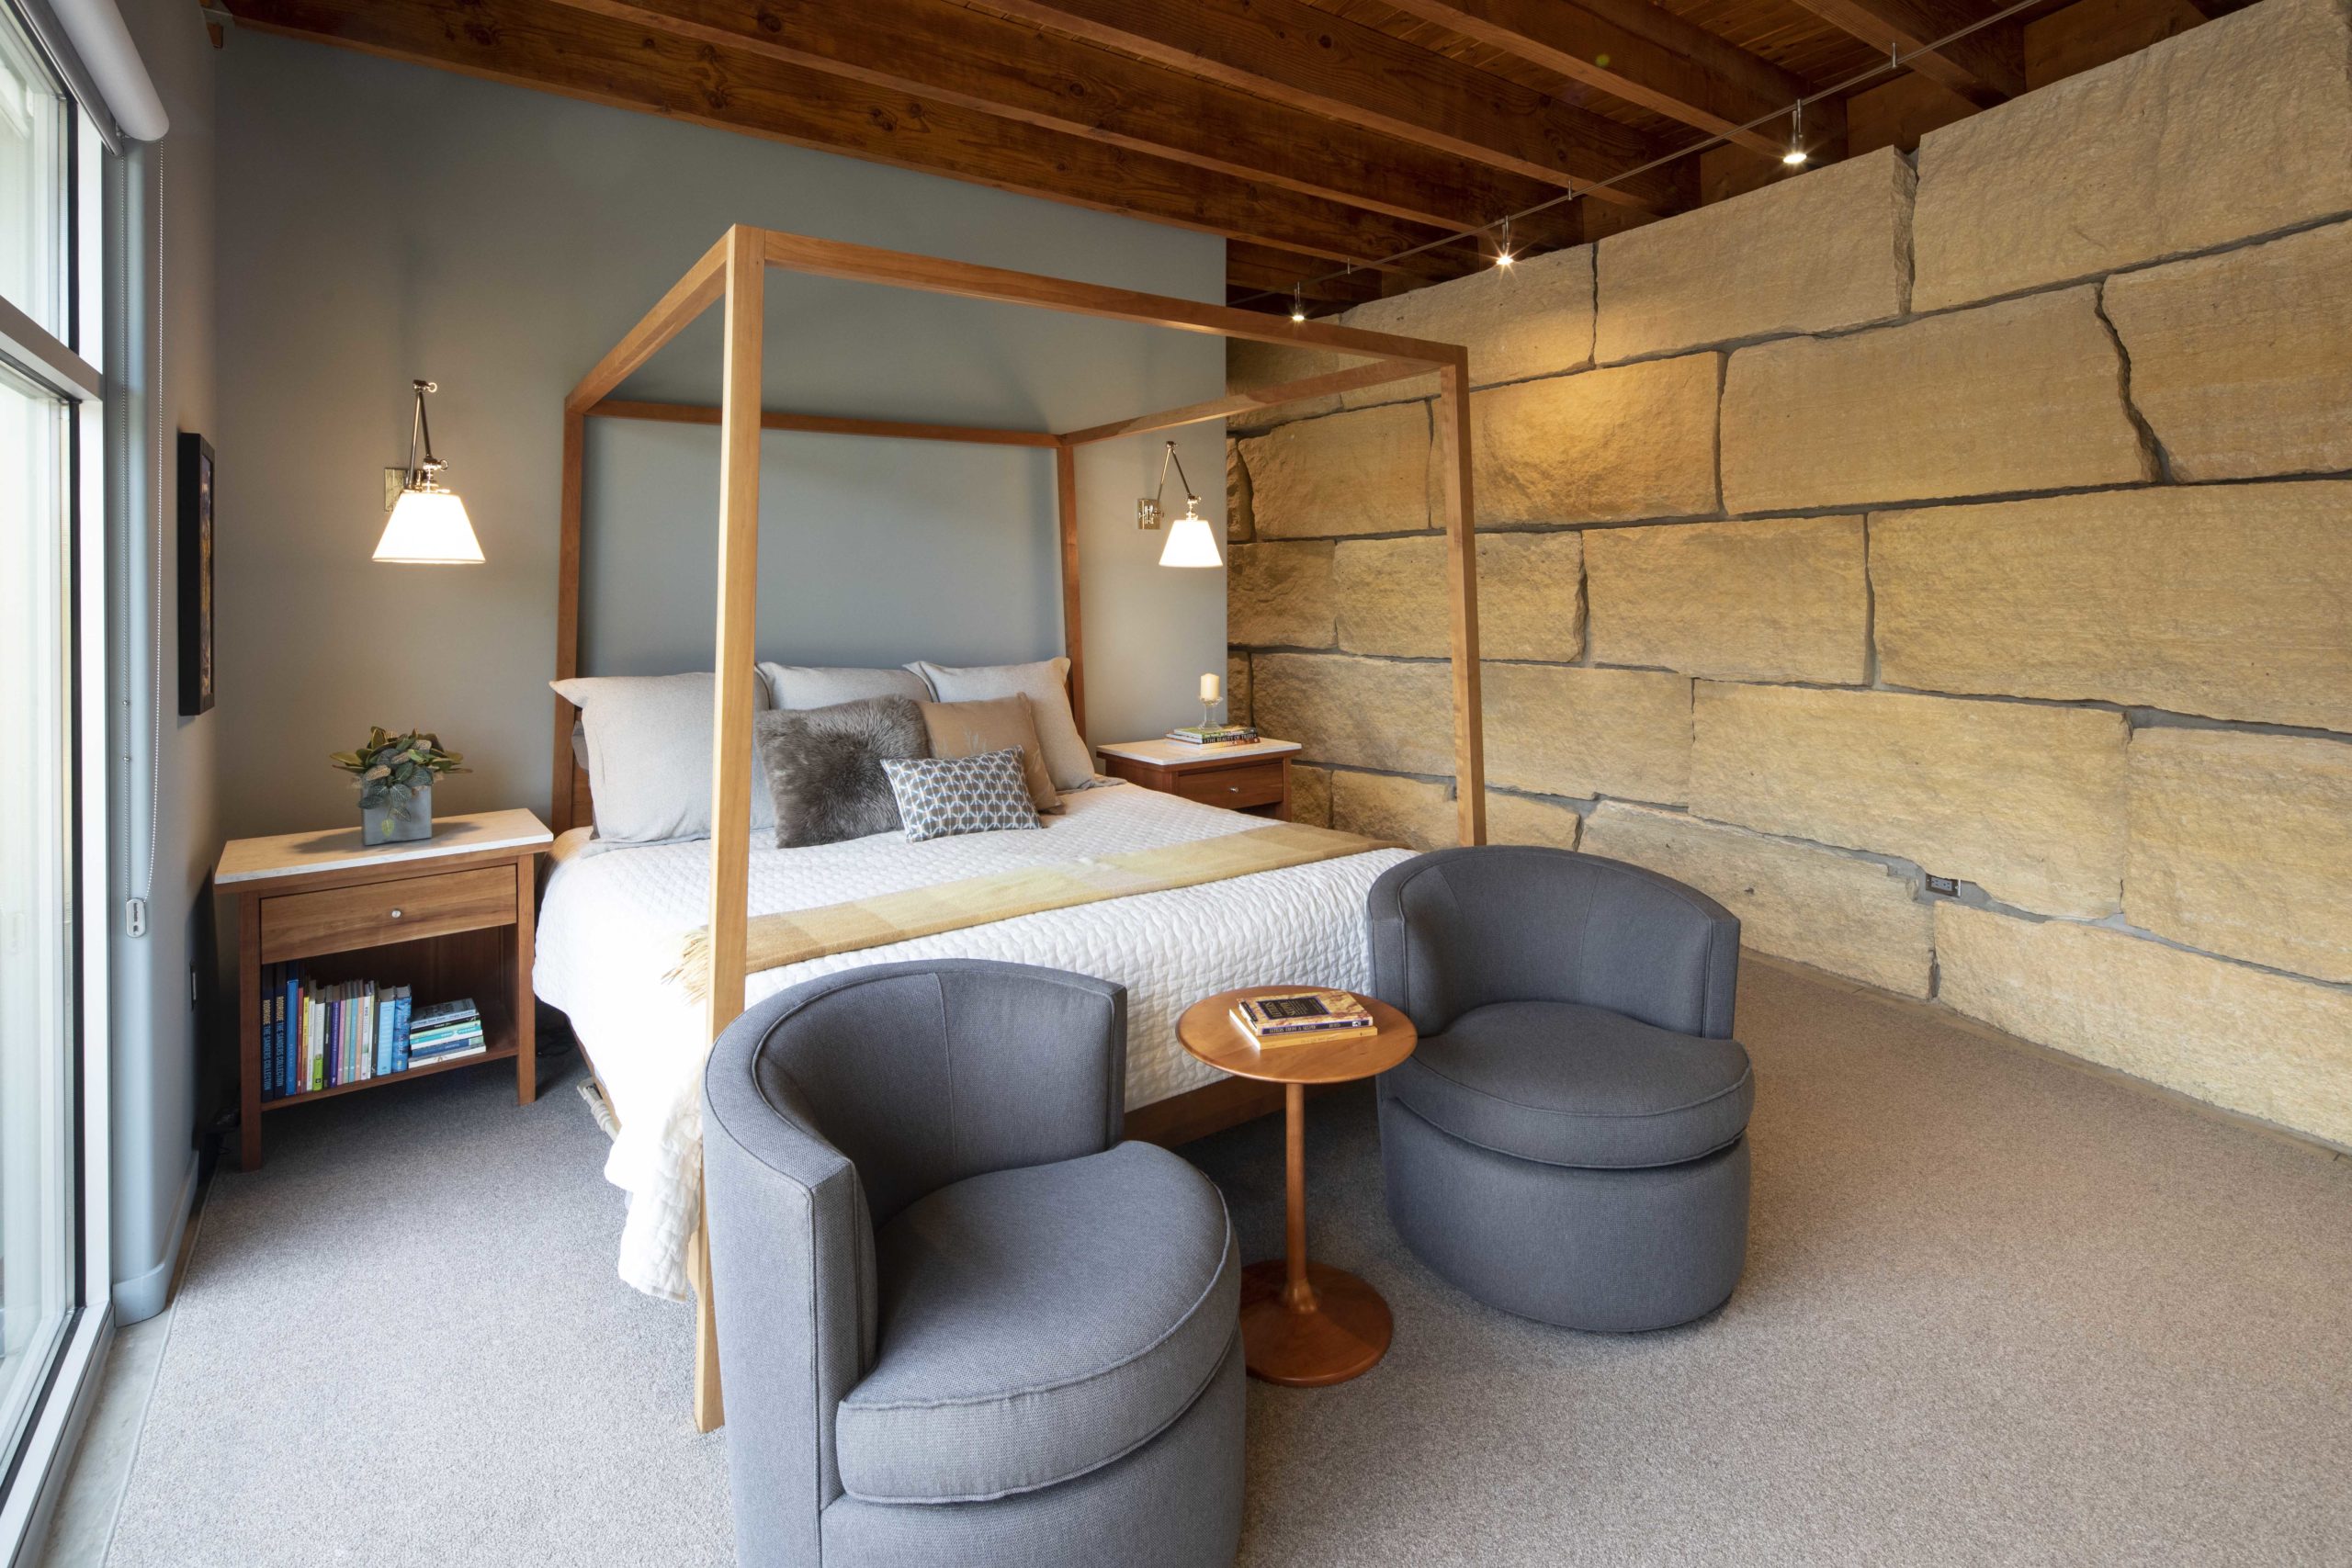 A contemporary four poster bed in a bedroom with stone walls.